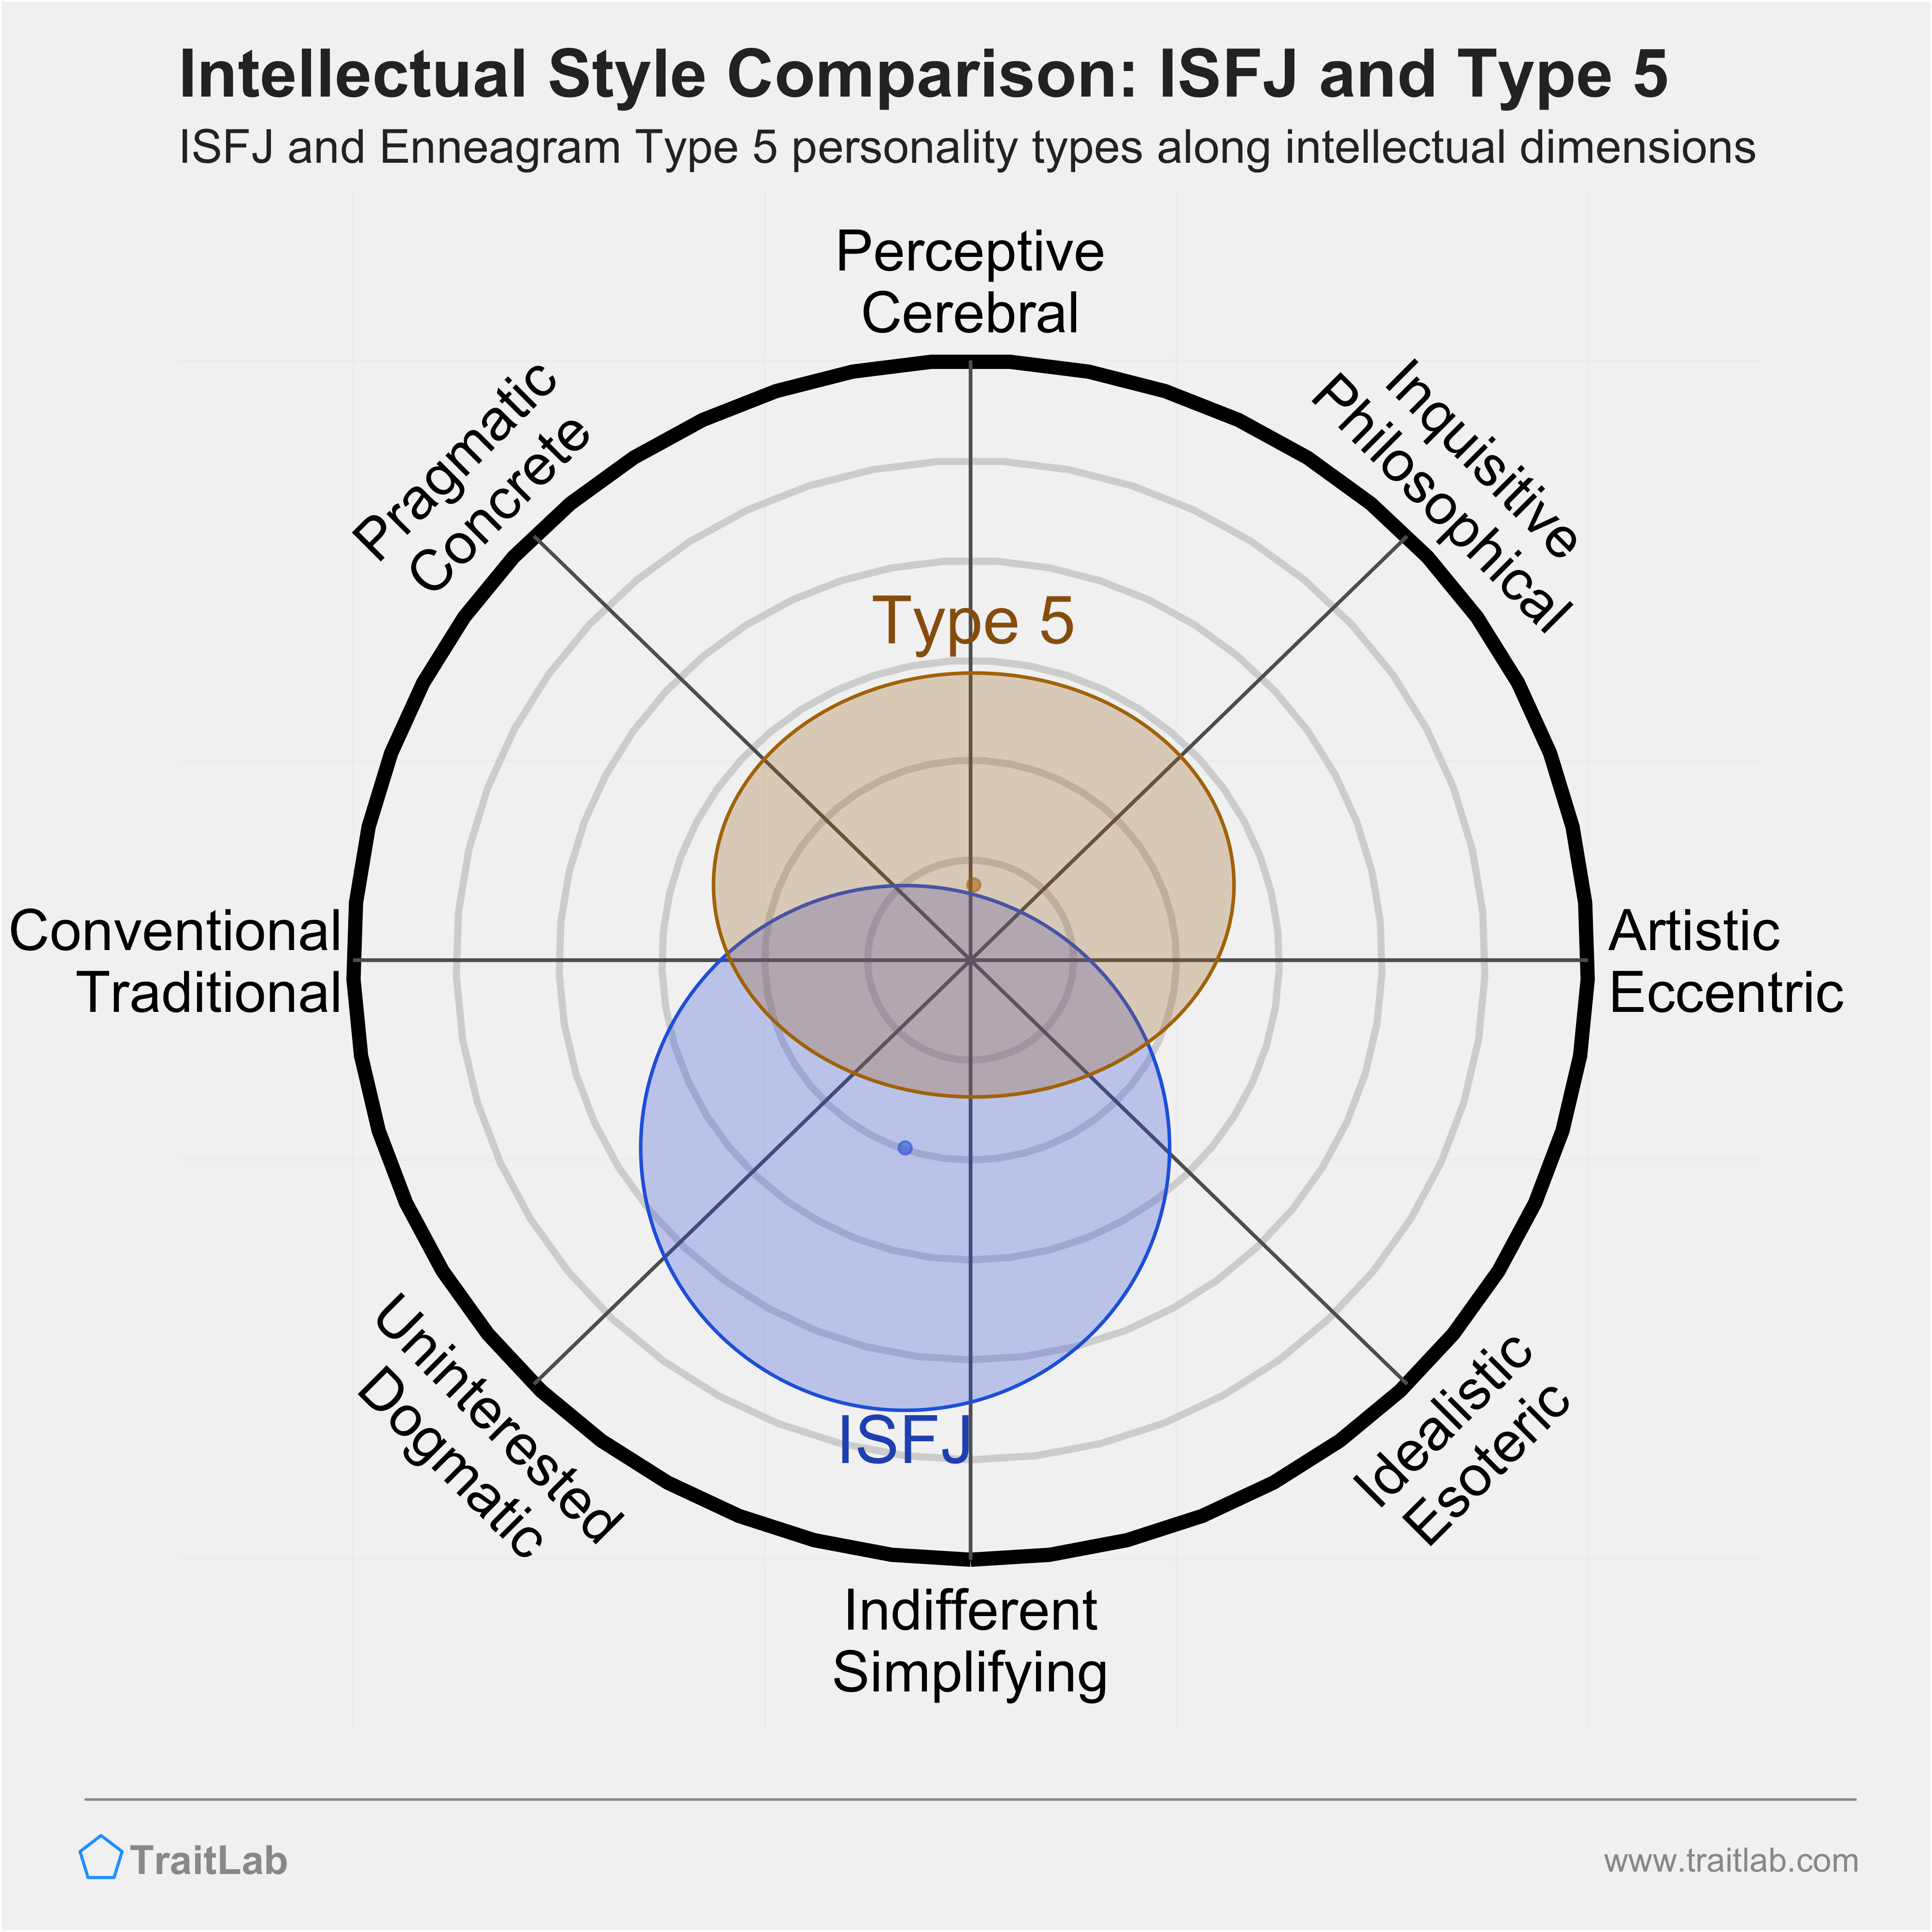 ISFJ and Type 5 comparison across intellectual dimensions